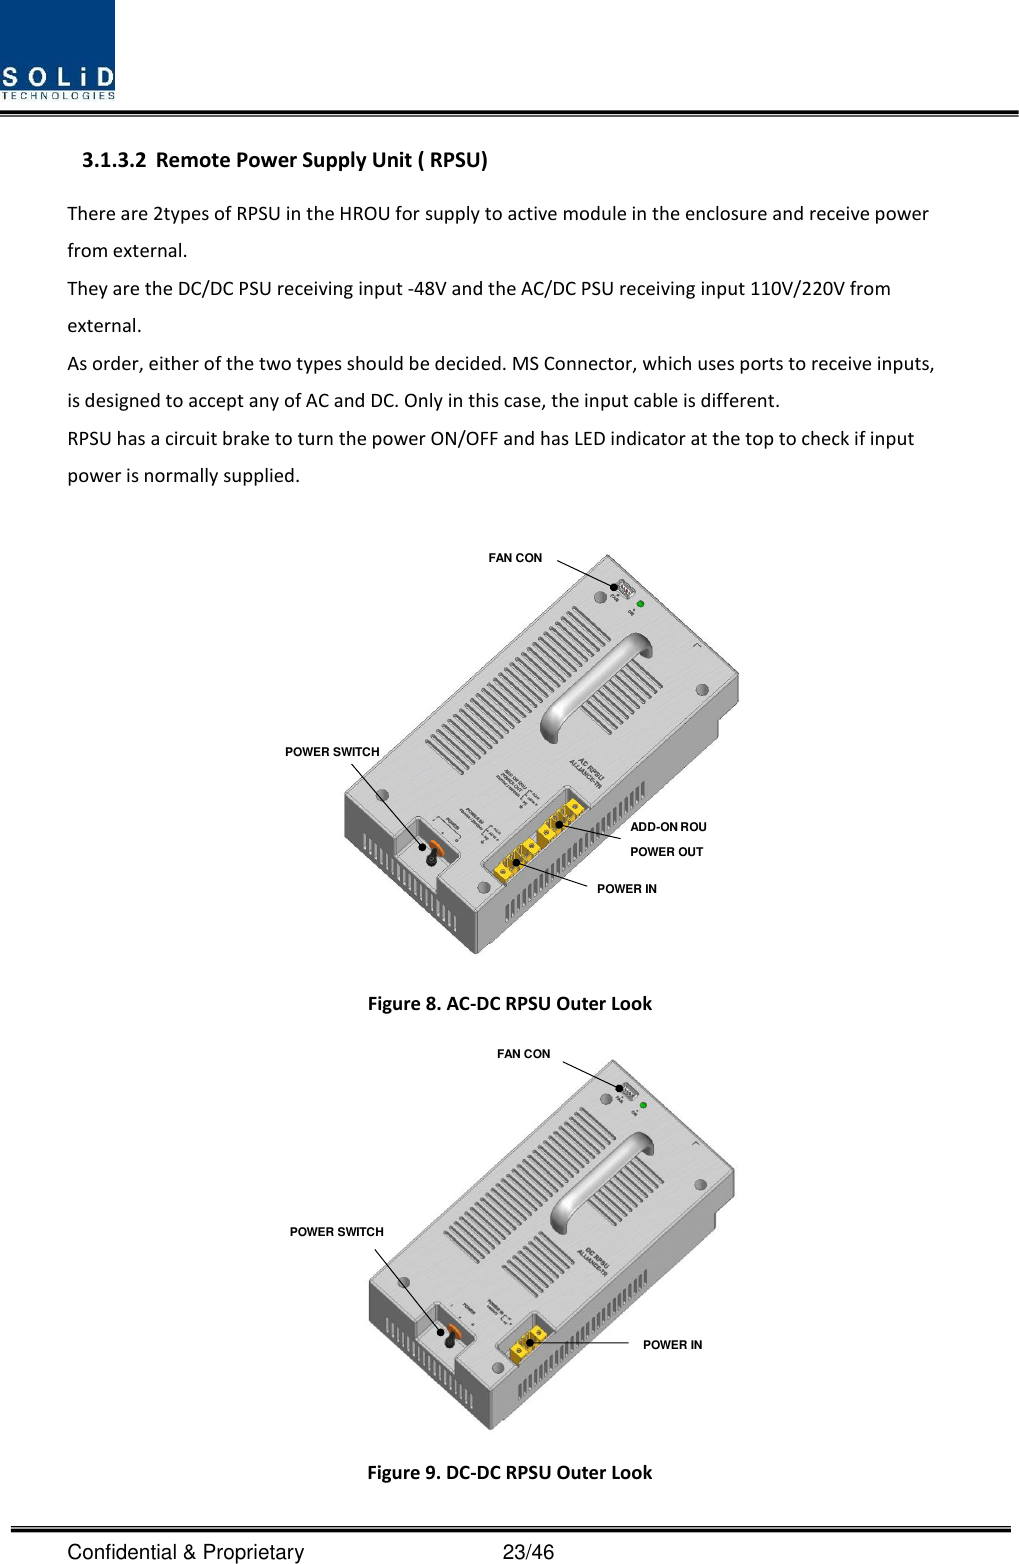  Confidential &amp; Proprietary                                      23/46 3.1.3.2 Remote Power Supply Unit ( RPSU) There are 2types of RPSU in the HROU for supply to active module in the enclosure and receive power from external.   They are the DC/DC PSU receiving input -48V and the AC/DC PSU receiving input 110V/220V from external. As order, either of the two types should be decided. MS Connector, which uses ports to receive inputs, is designed to accept any of AC and DC. Only in this case, the input cable is different. RPSU has a circuit brake to turn the power ON/OFF and has LED indicator at the top to check if input power is normally supplied.   Figure 8. AC-DC RPSU Outer Look  Figure 9. DC-DC RPSU Outer Look POWER SWITCHFAN CONPOWER INADD-ON ROU POWER OUTPOWER INPOWER SWITCHFAN CON